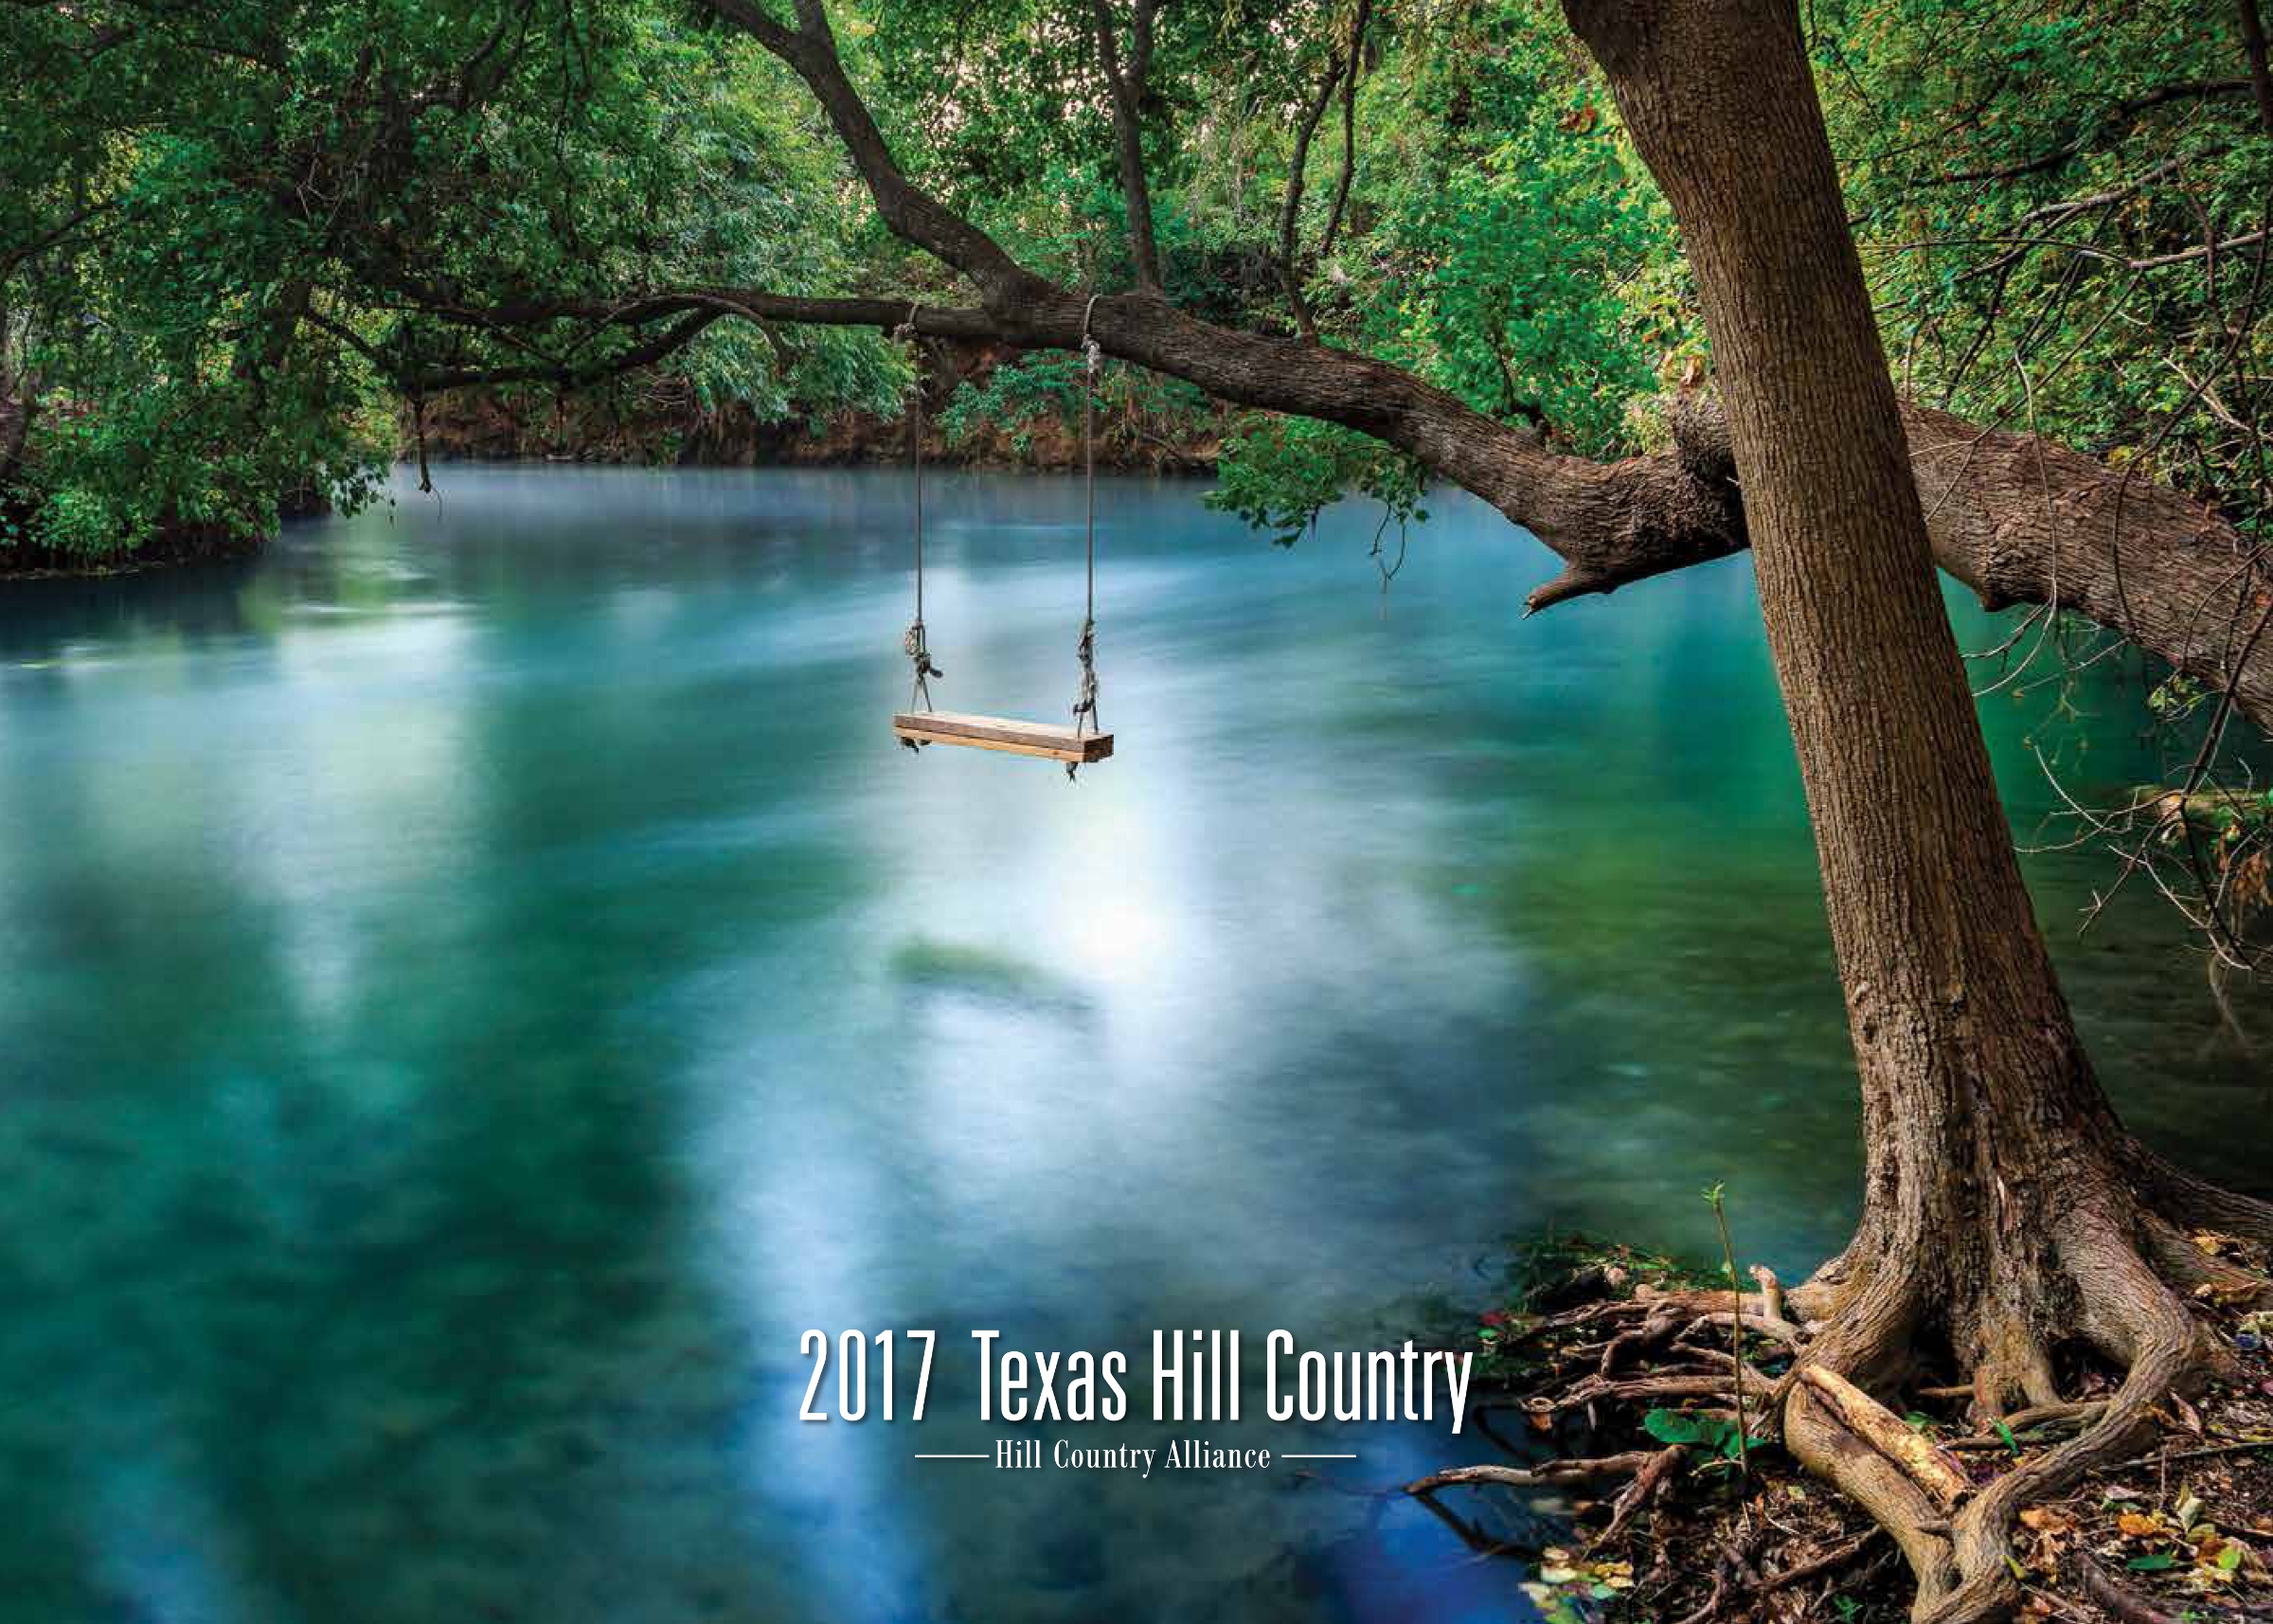 2017 Texas Hill Country Calendar Available for Sale: Photo Contest